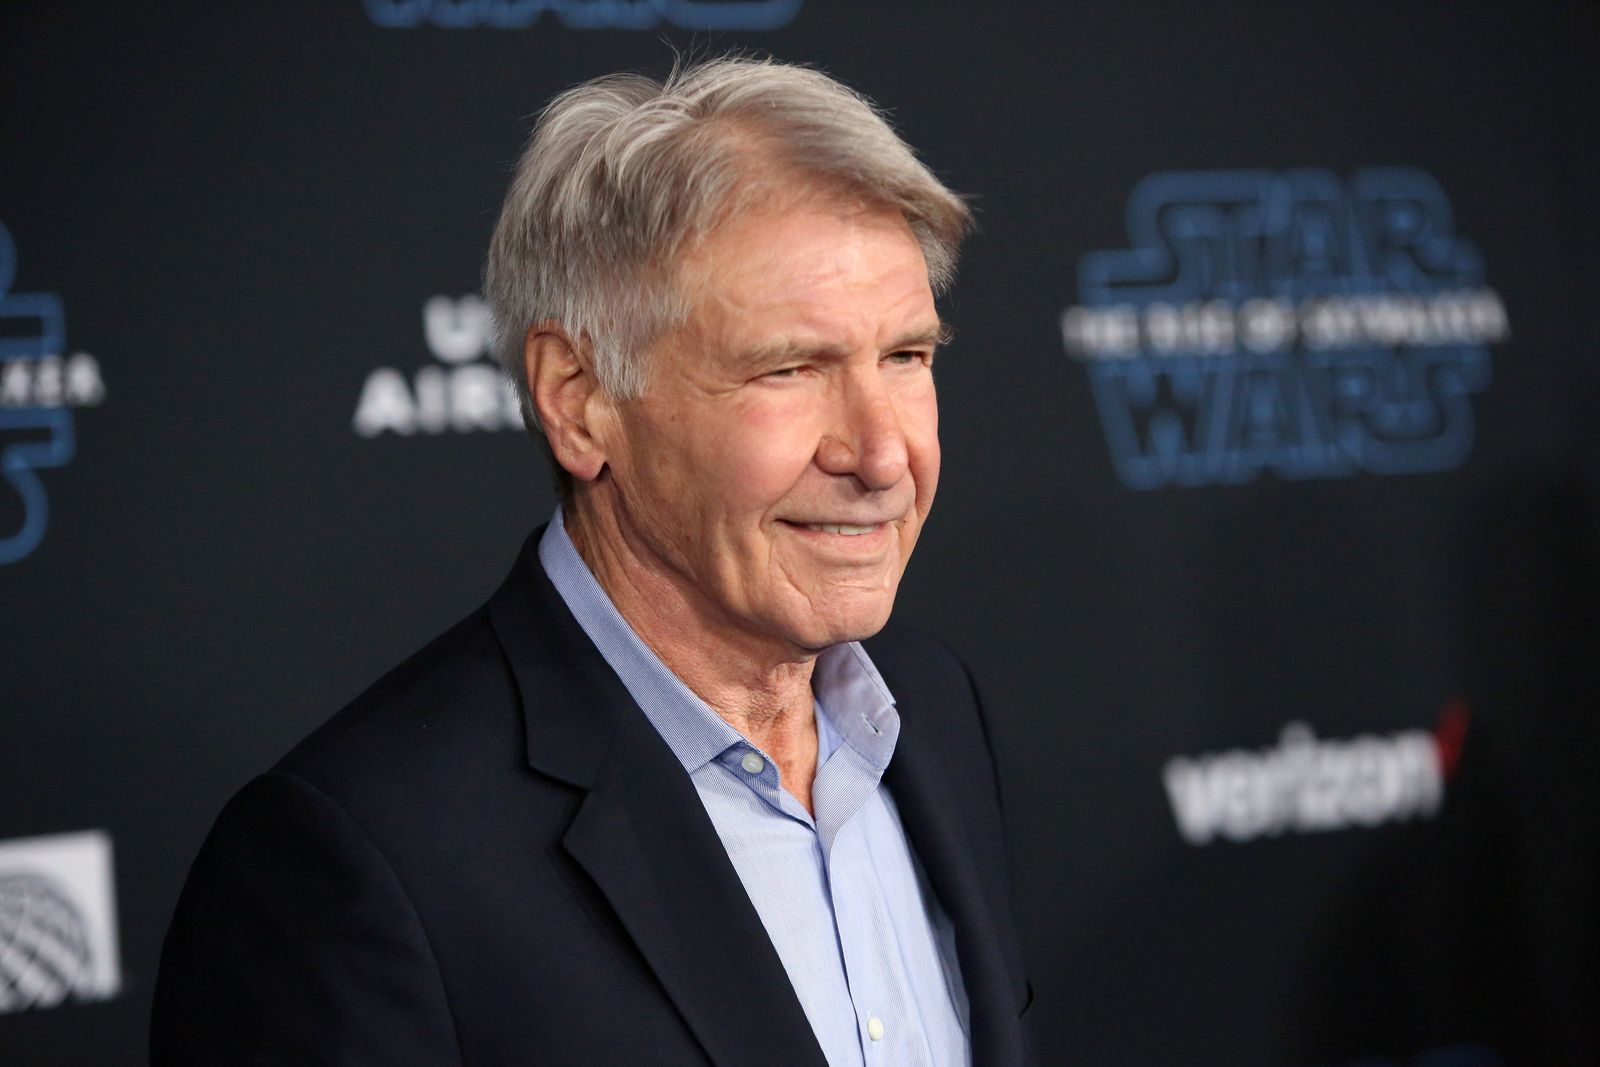 Harrison Ford at the world premiere of "Star Wars: The Rise of Skywalker" on December 16, 2019, in Hollywood, California | Photo: Getty Images